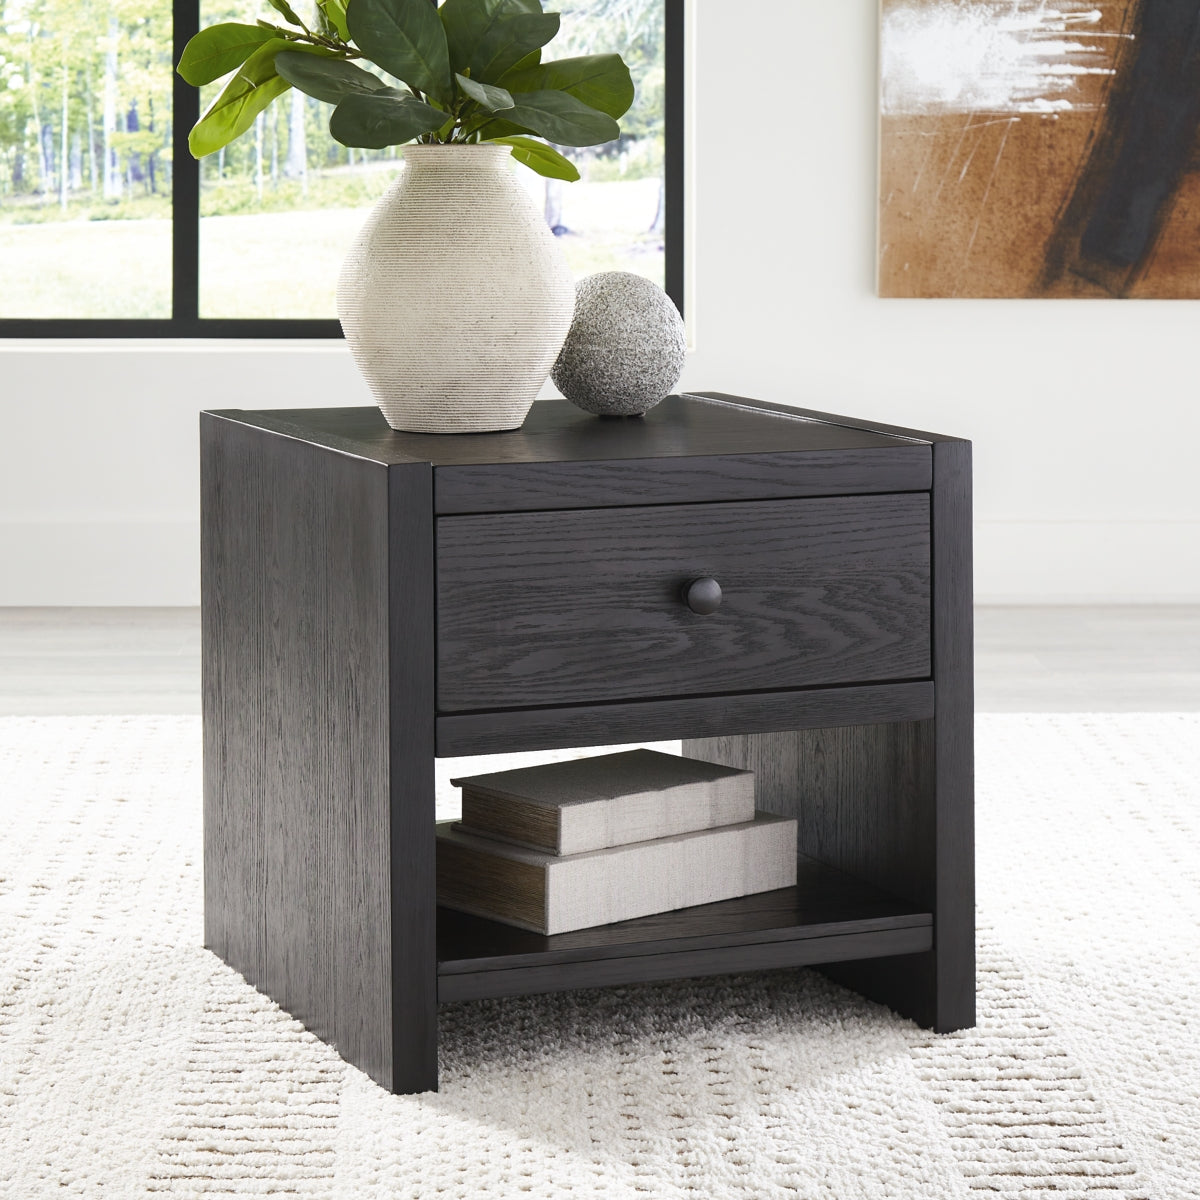 Foyland Coffee Table with 2 End Tables